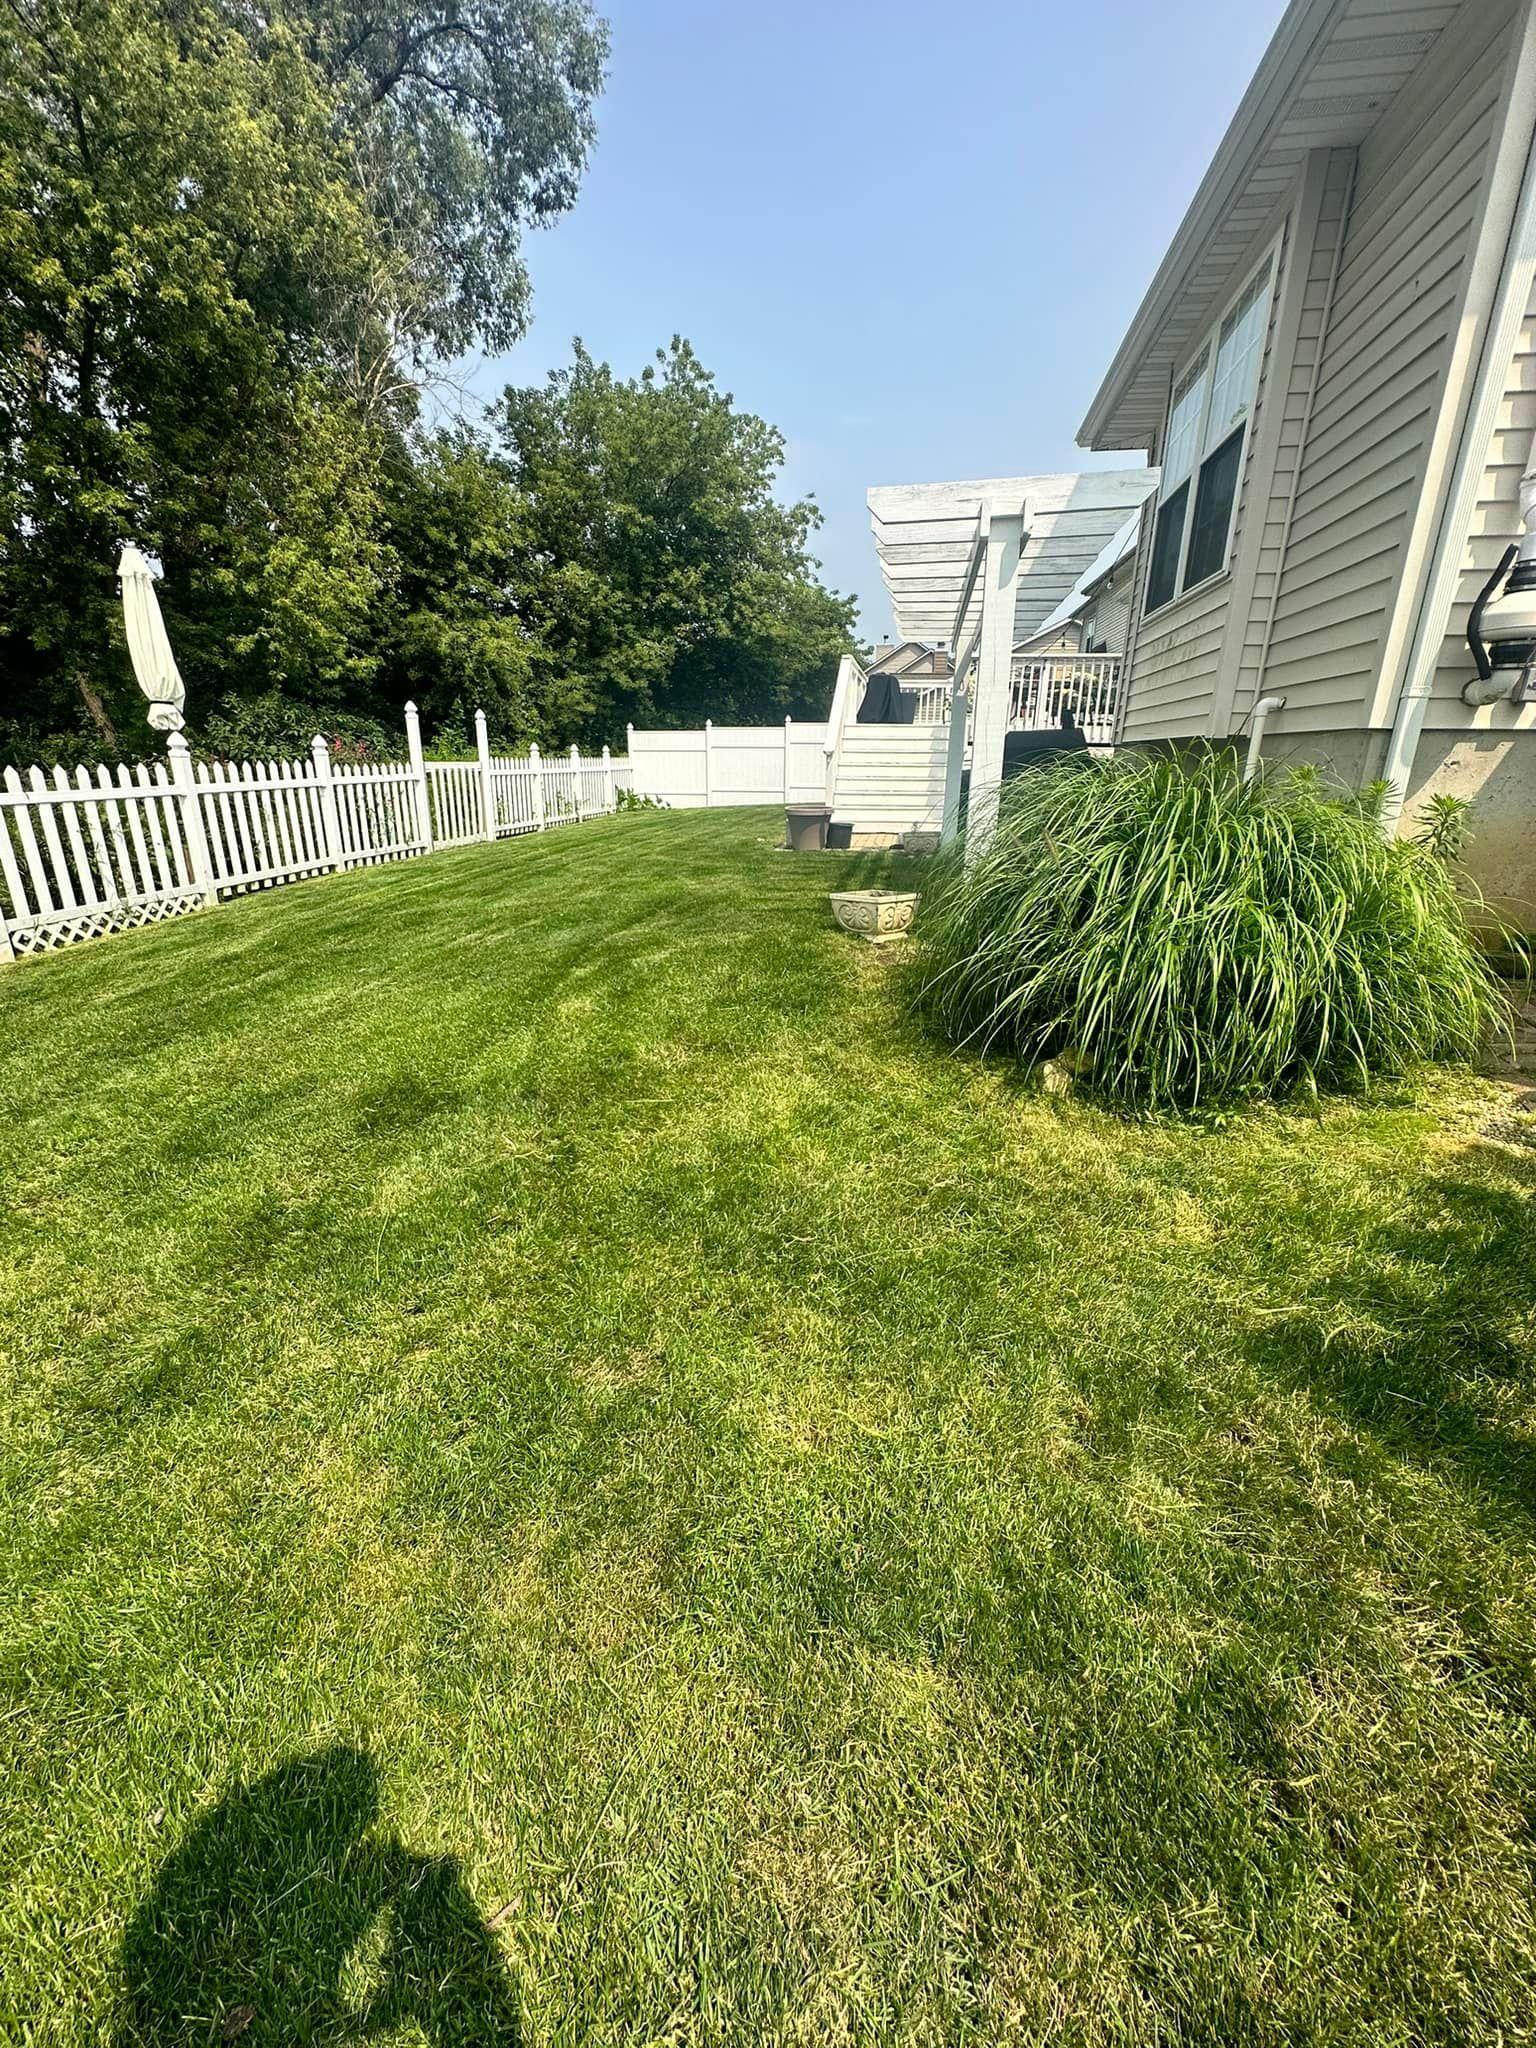  for Torres Lawn & Landscaping in Valparaiso, IN